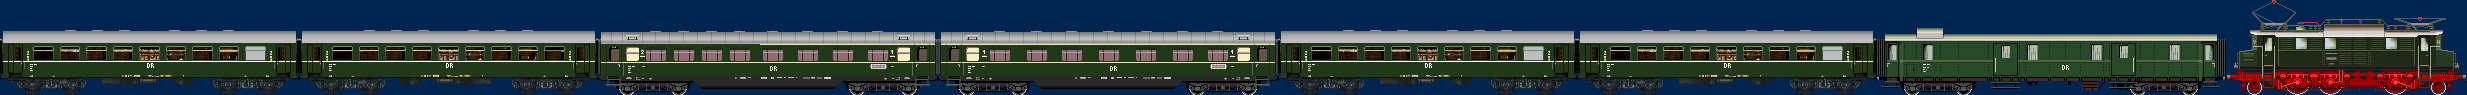 DR fast train Era III with train from Reko four axle, modernisation coaches and Pw4i 32